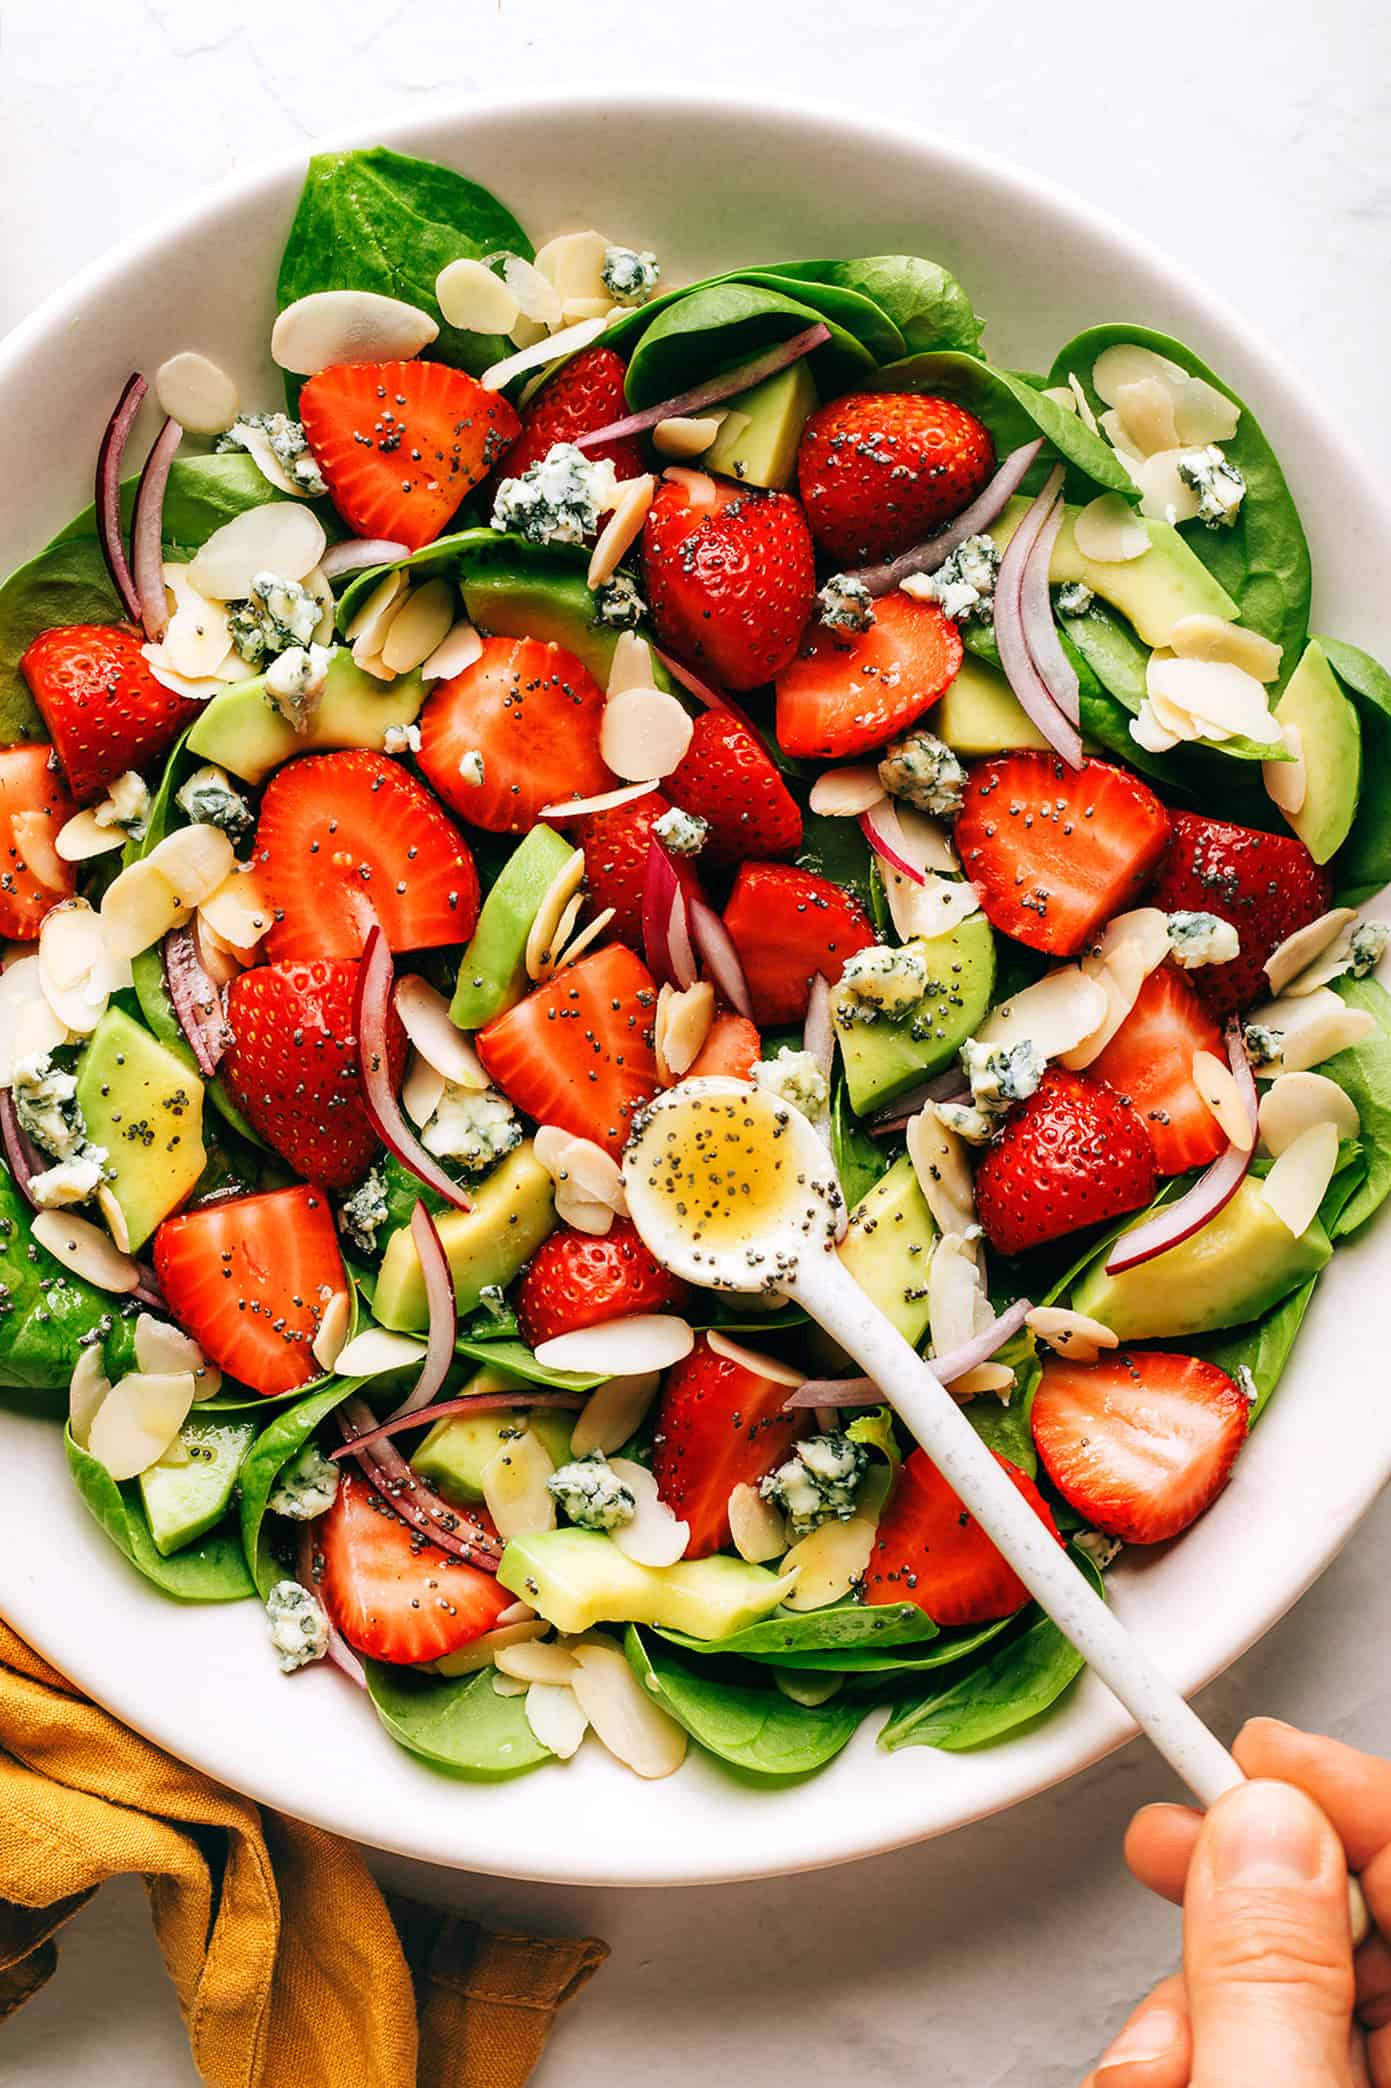 Strawberry Avocado Spinach Salad with Poppyseed Dressing